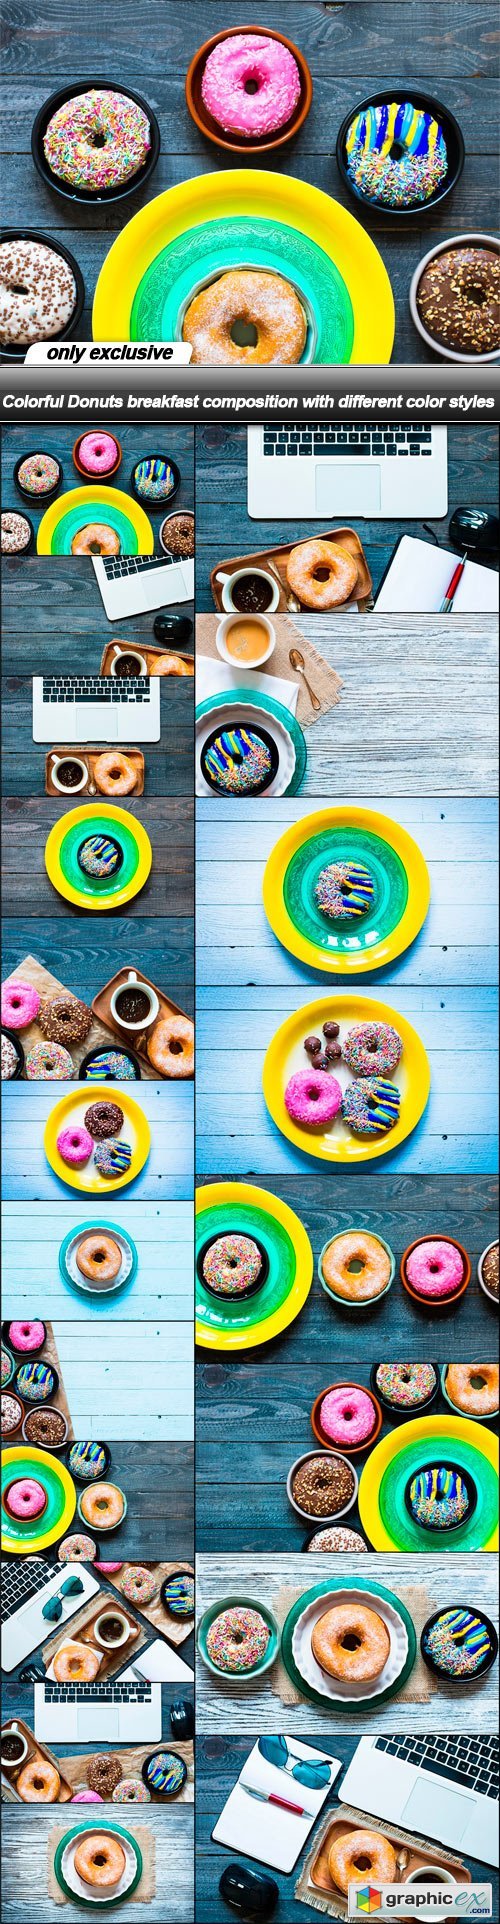 Colorful Donuts breakfast composition with different color styles - 20 UHQ JPEG